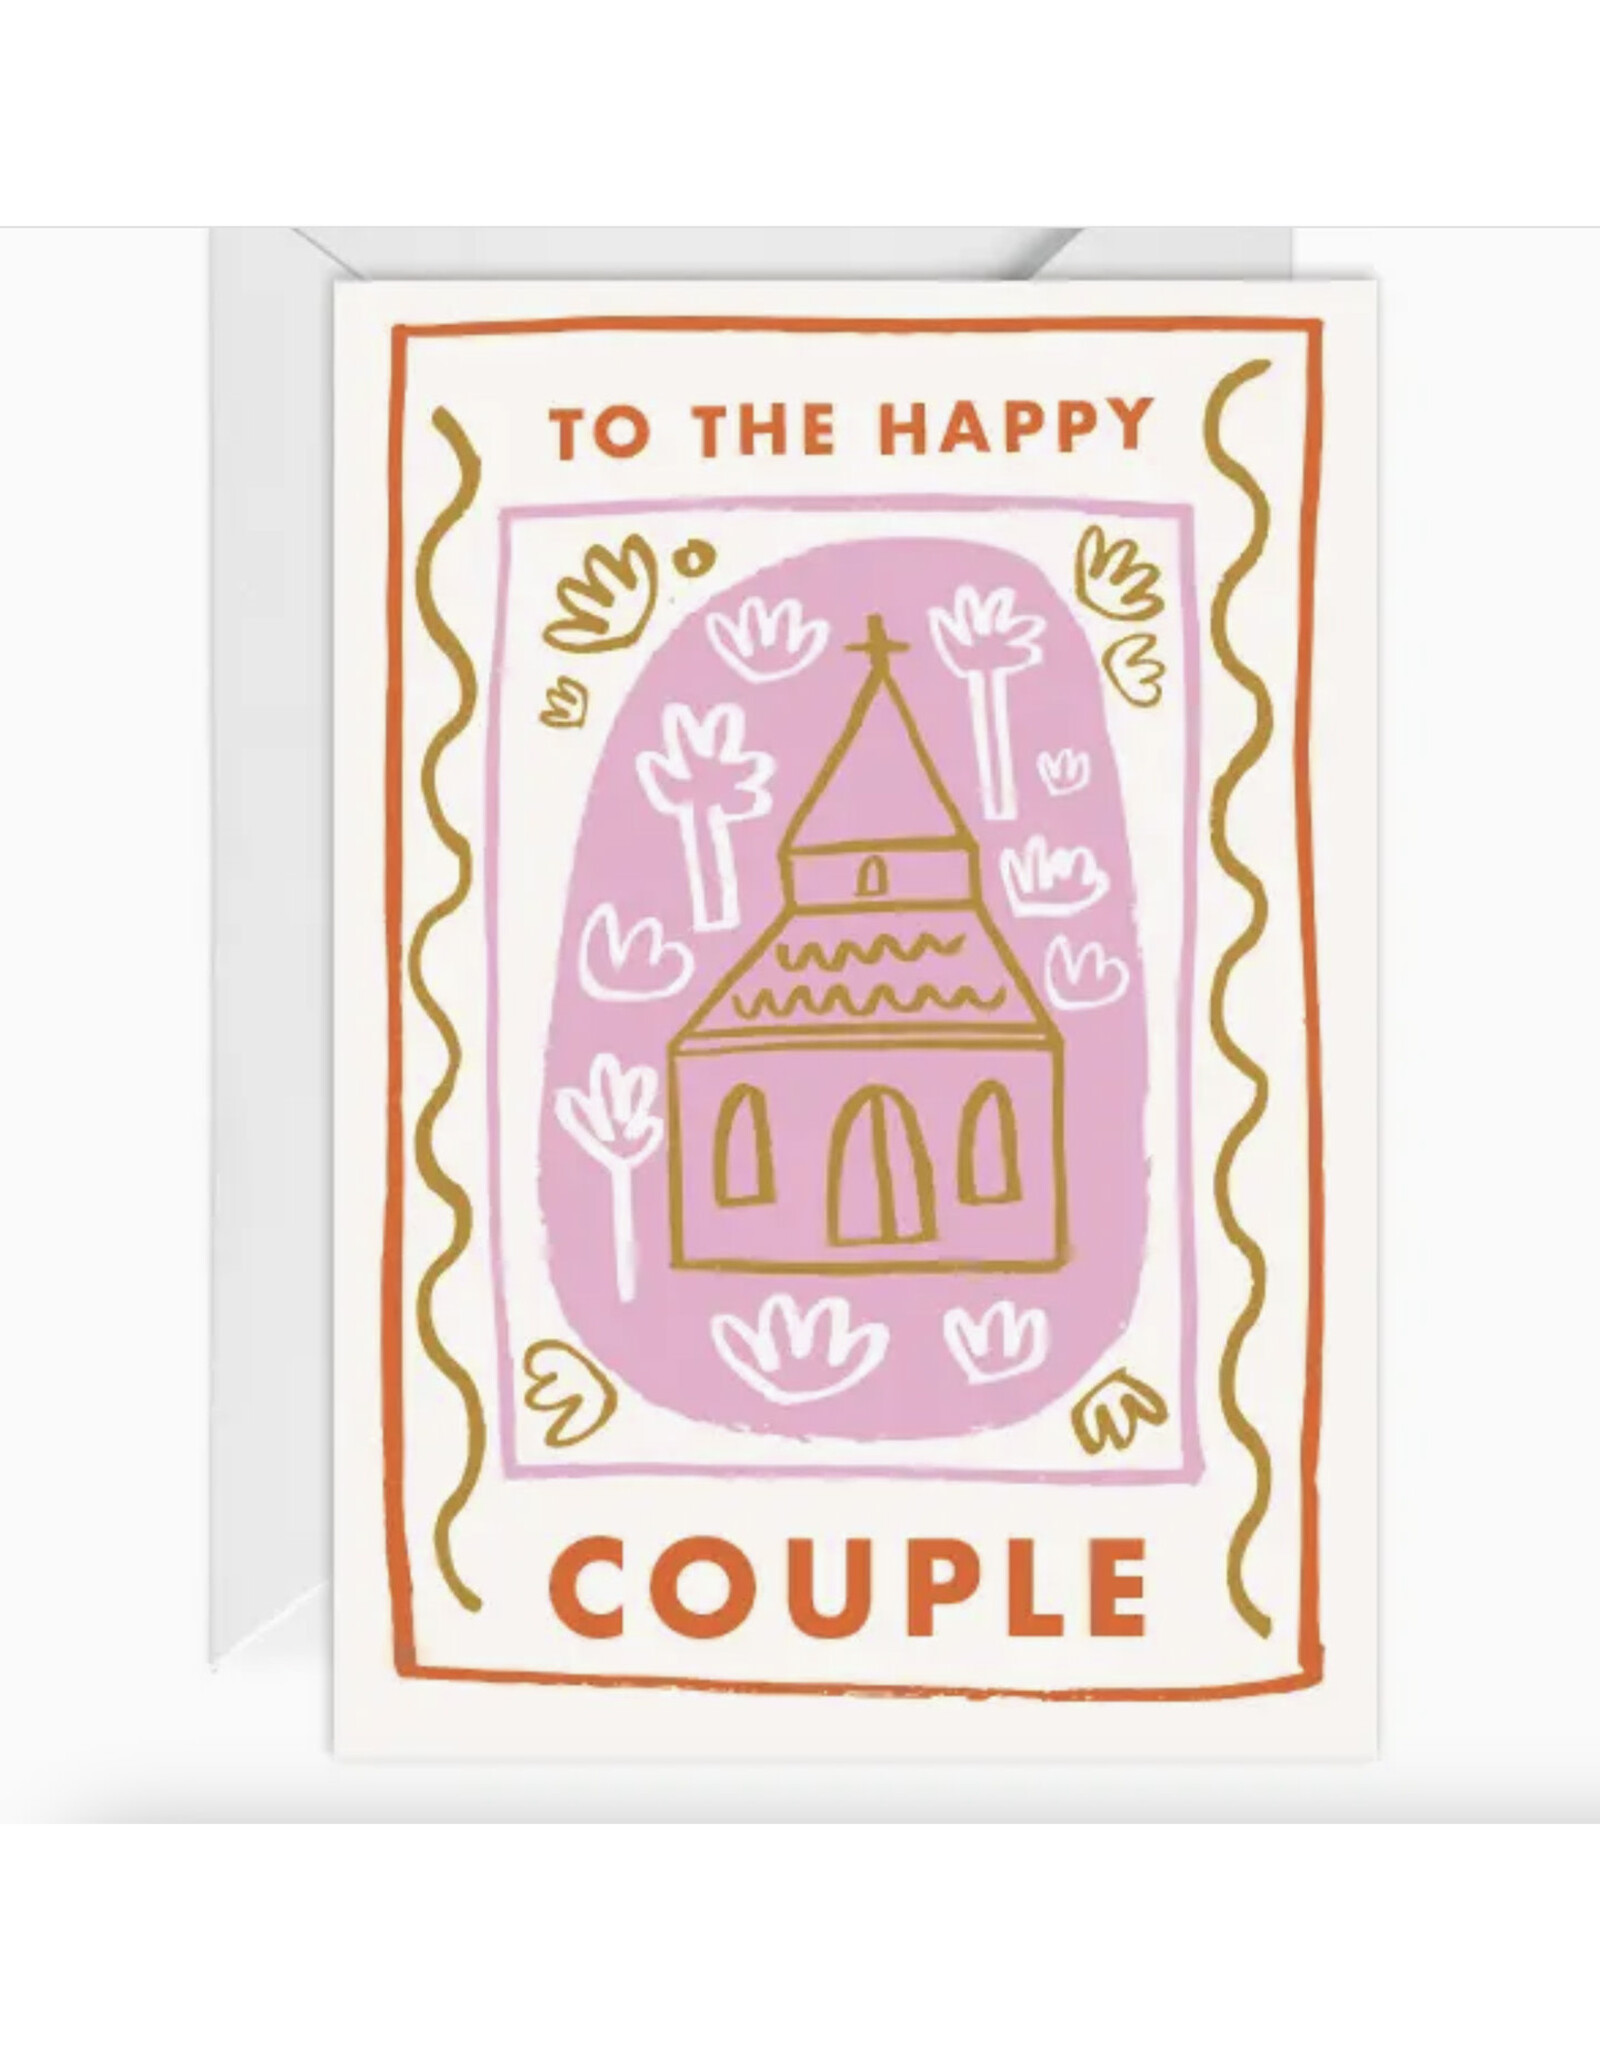 Happy Go Lucky To the Happy Couple Cute Church Greeting Card